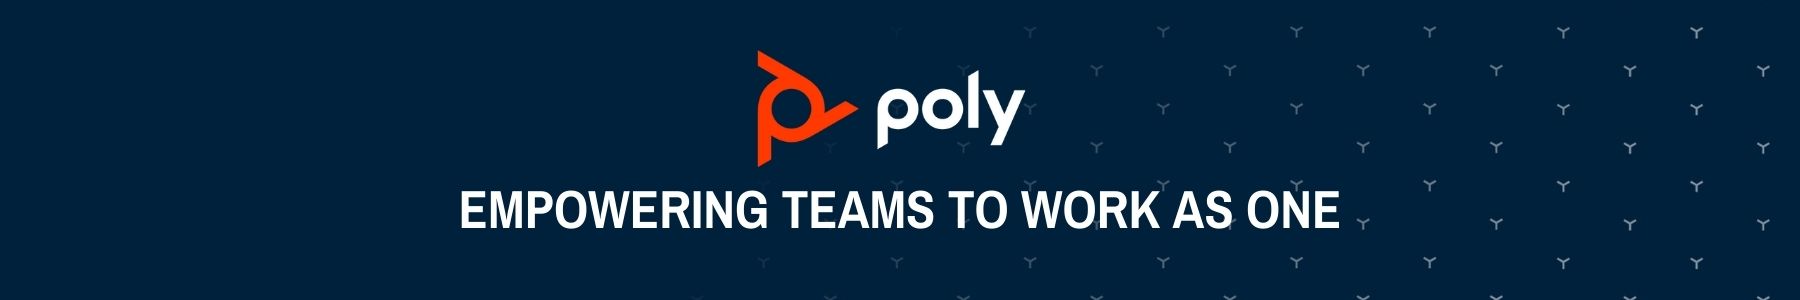 poly-empowering-teams-to-work-as-one-1800x300-rev3